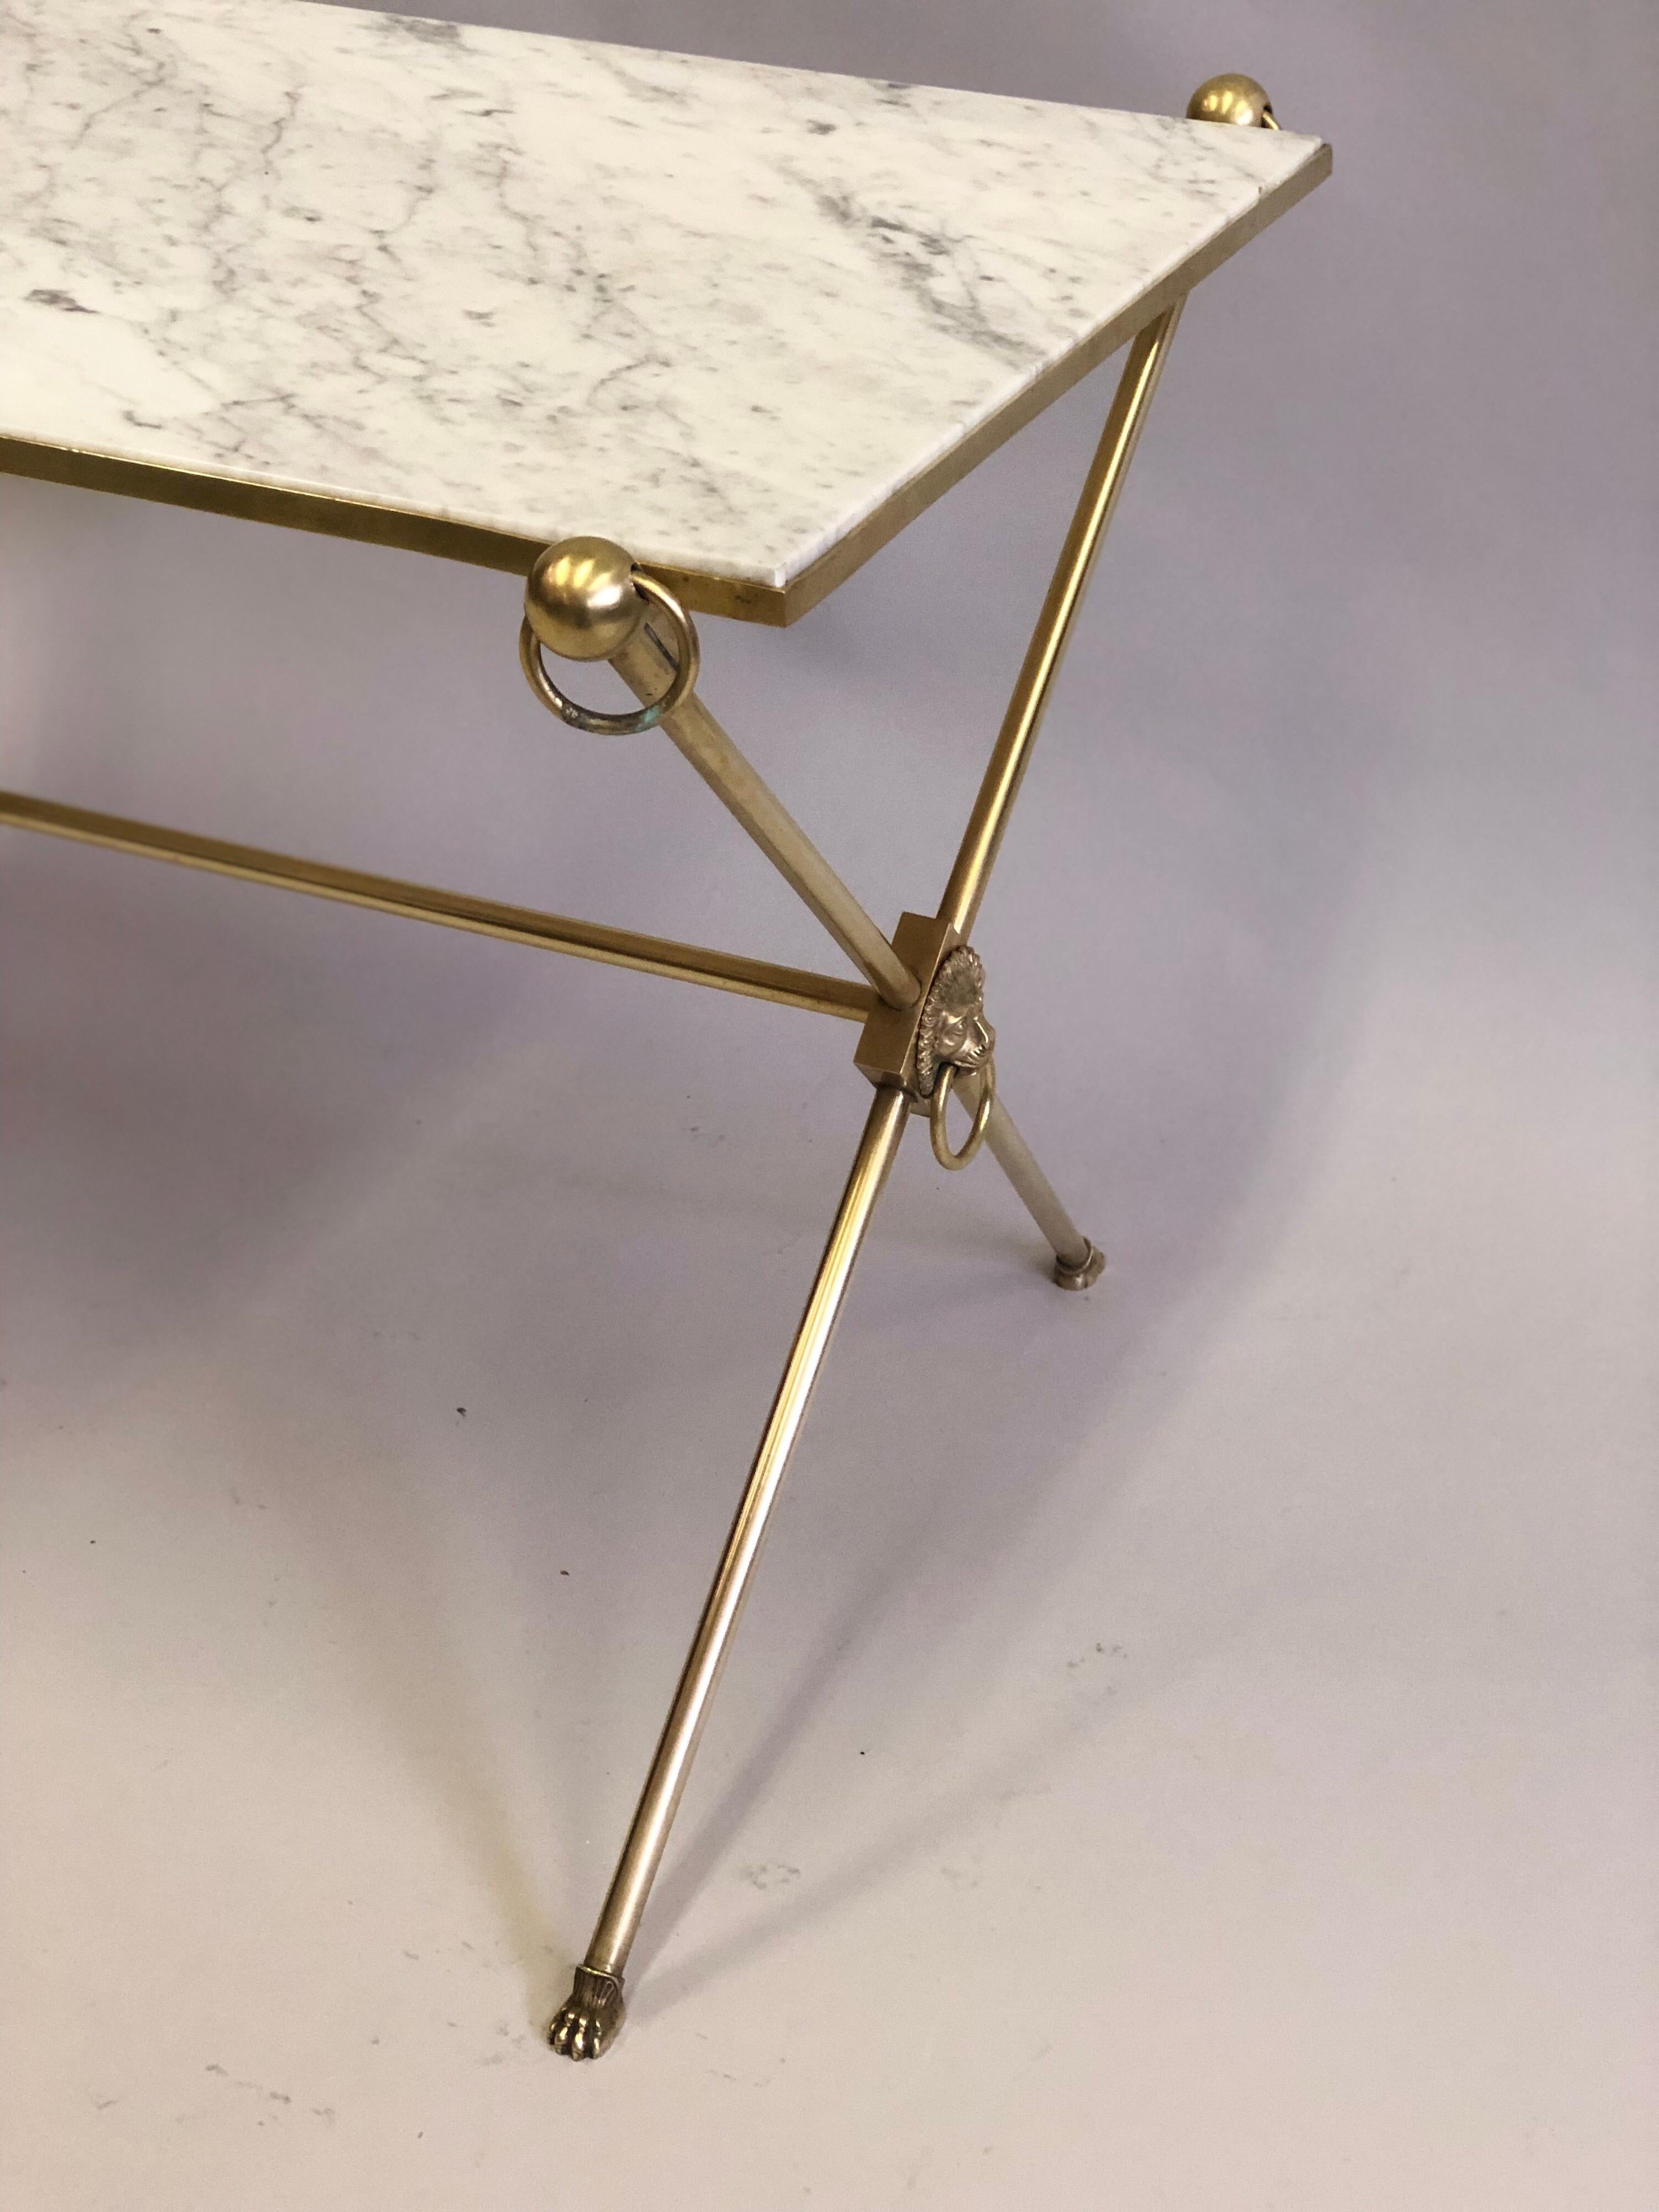 20th Century French Modern Neoclassical Brass and Marble Coffee Table by Maison Jansen